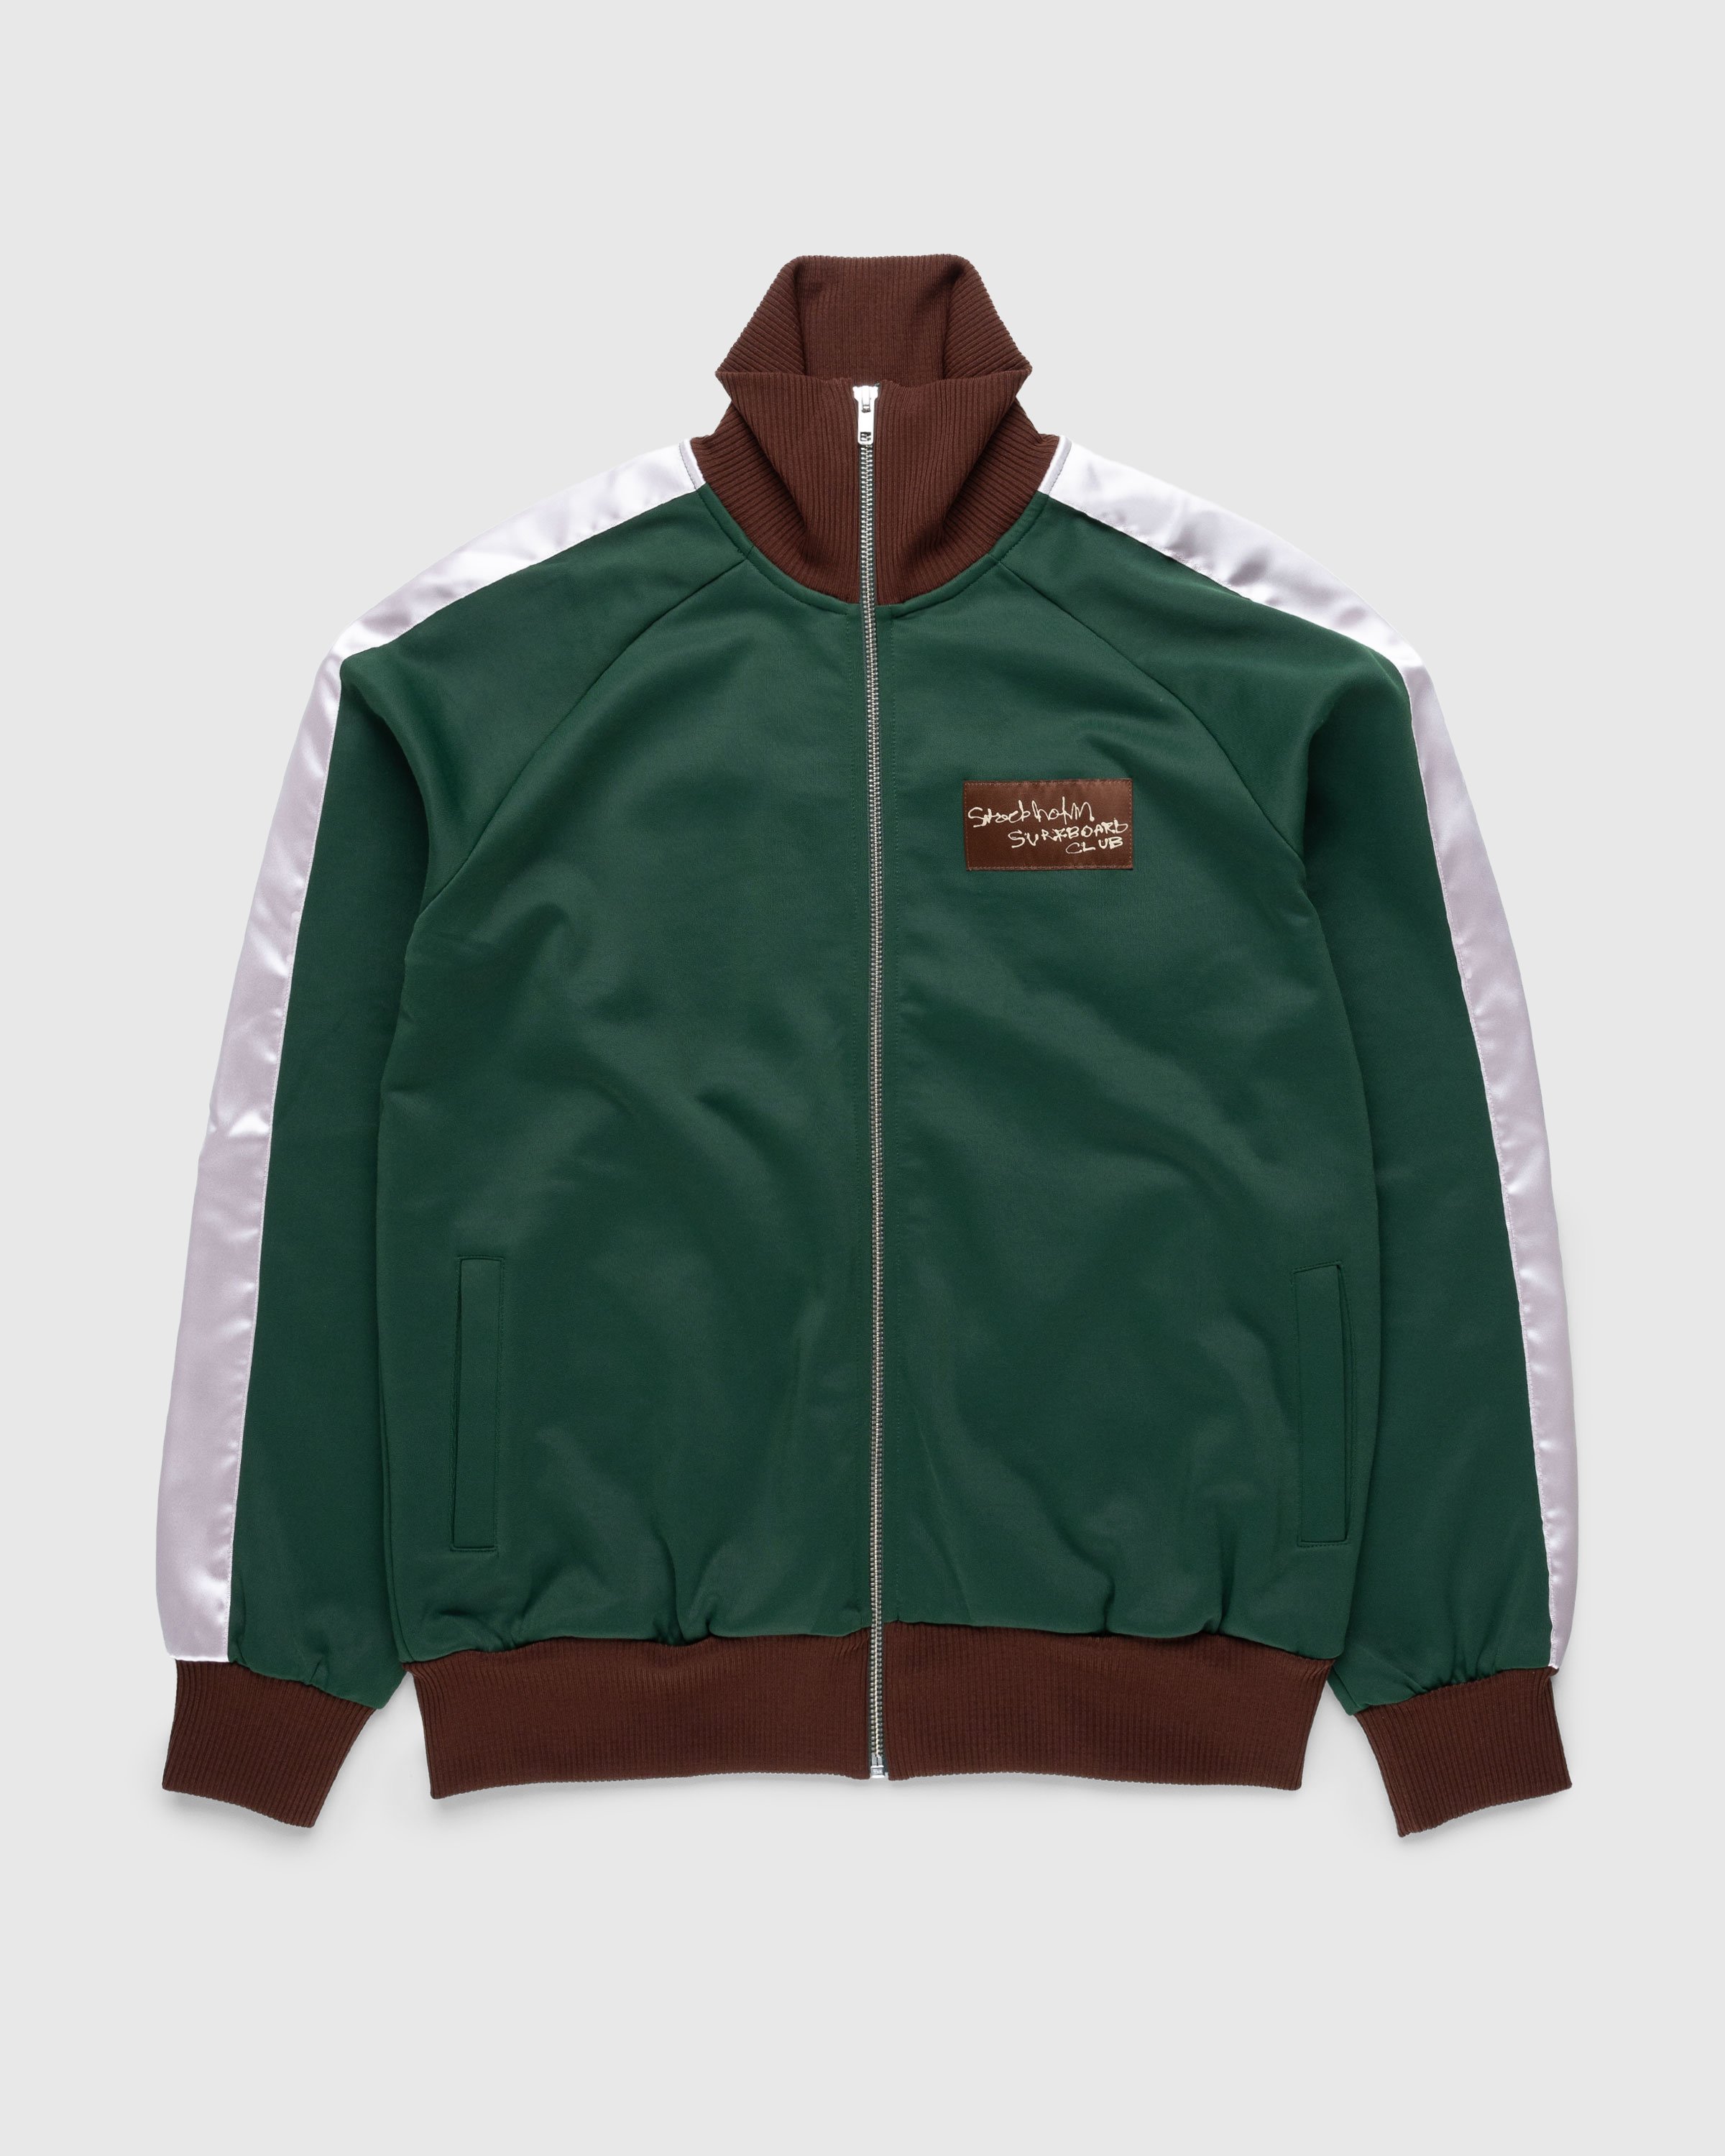 Stockholm Surfboard Club - Track Top Fall Green - Clothing - Green - Image 1